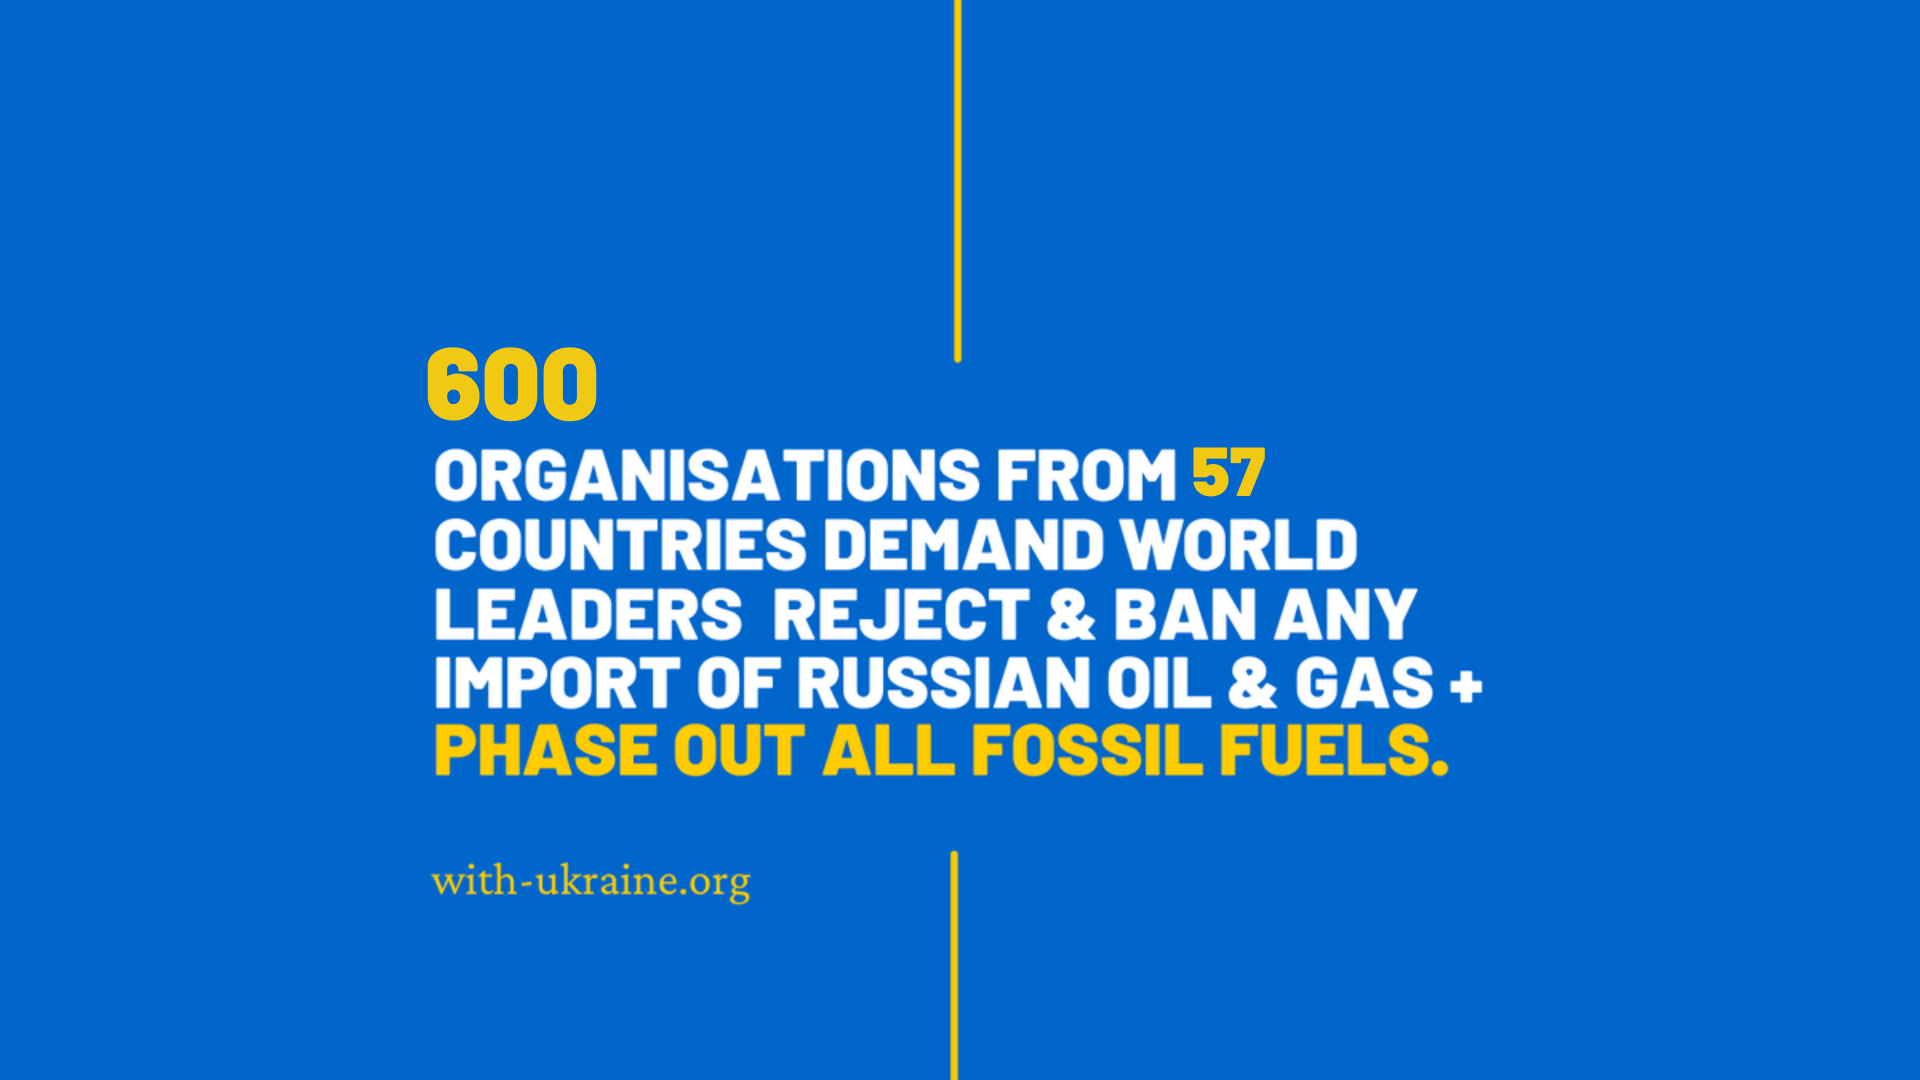 #StandWithUkraine to Phase Out Fossil Fuels